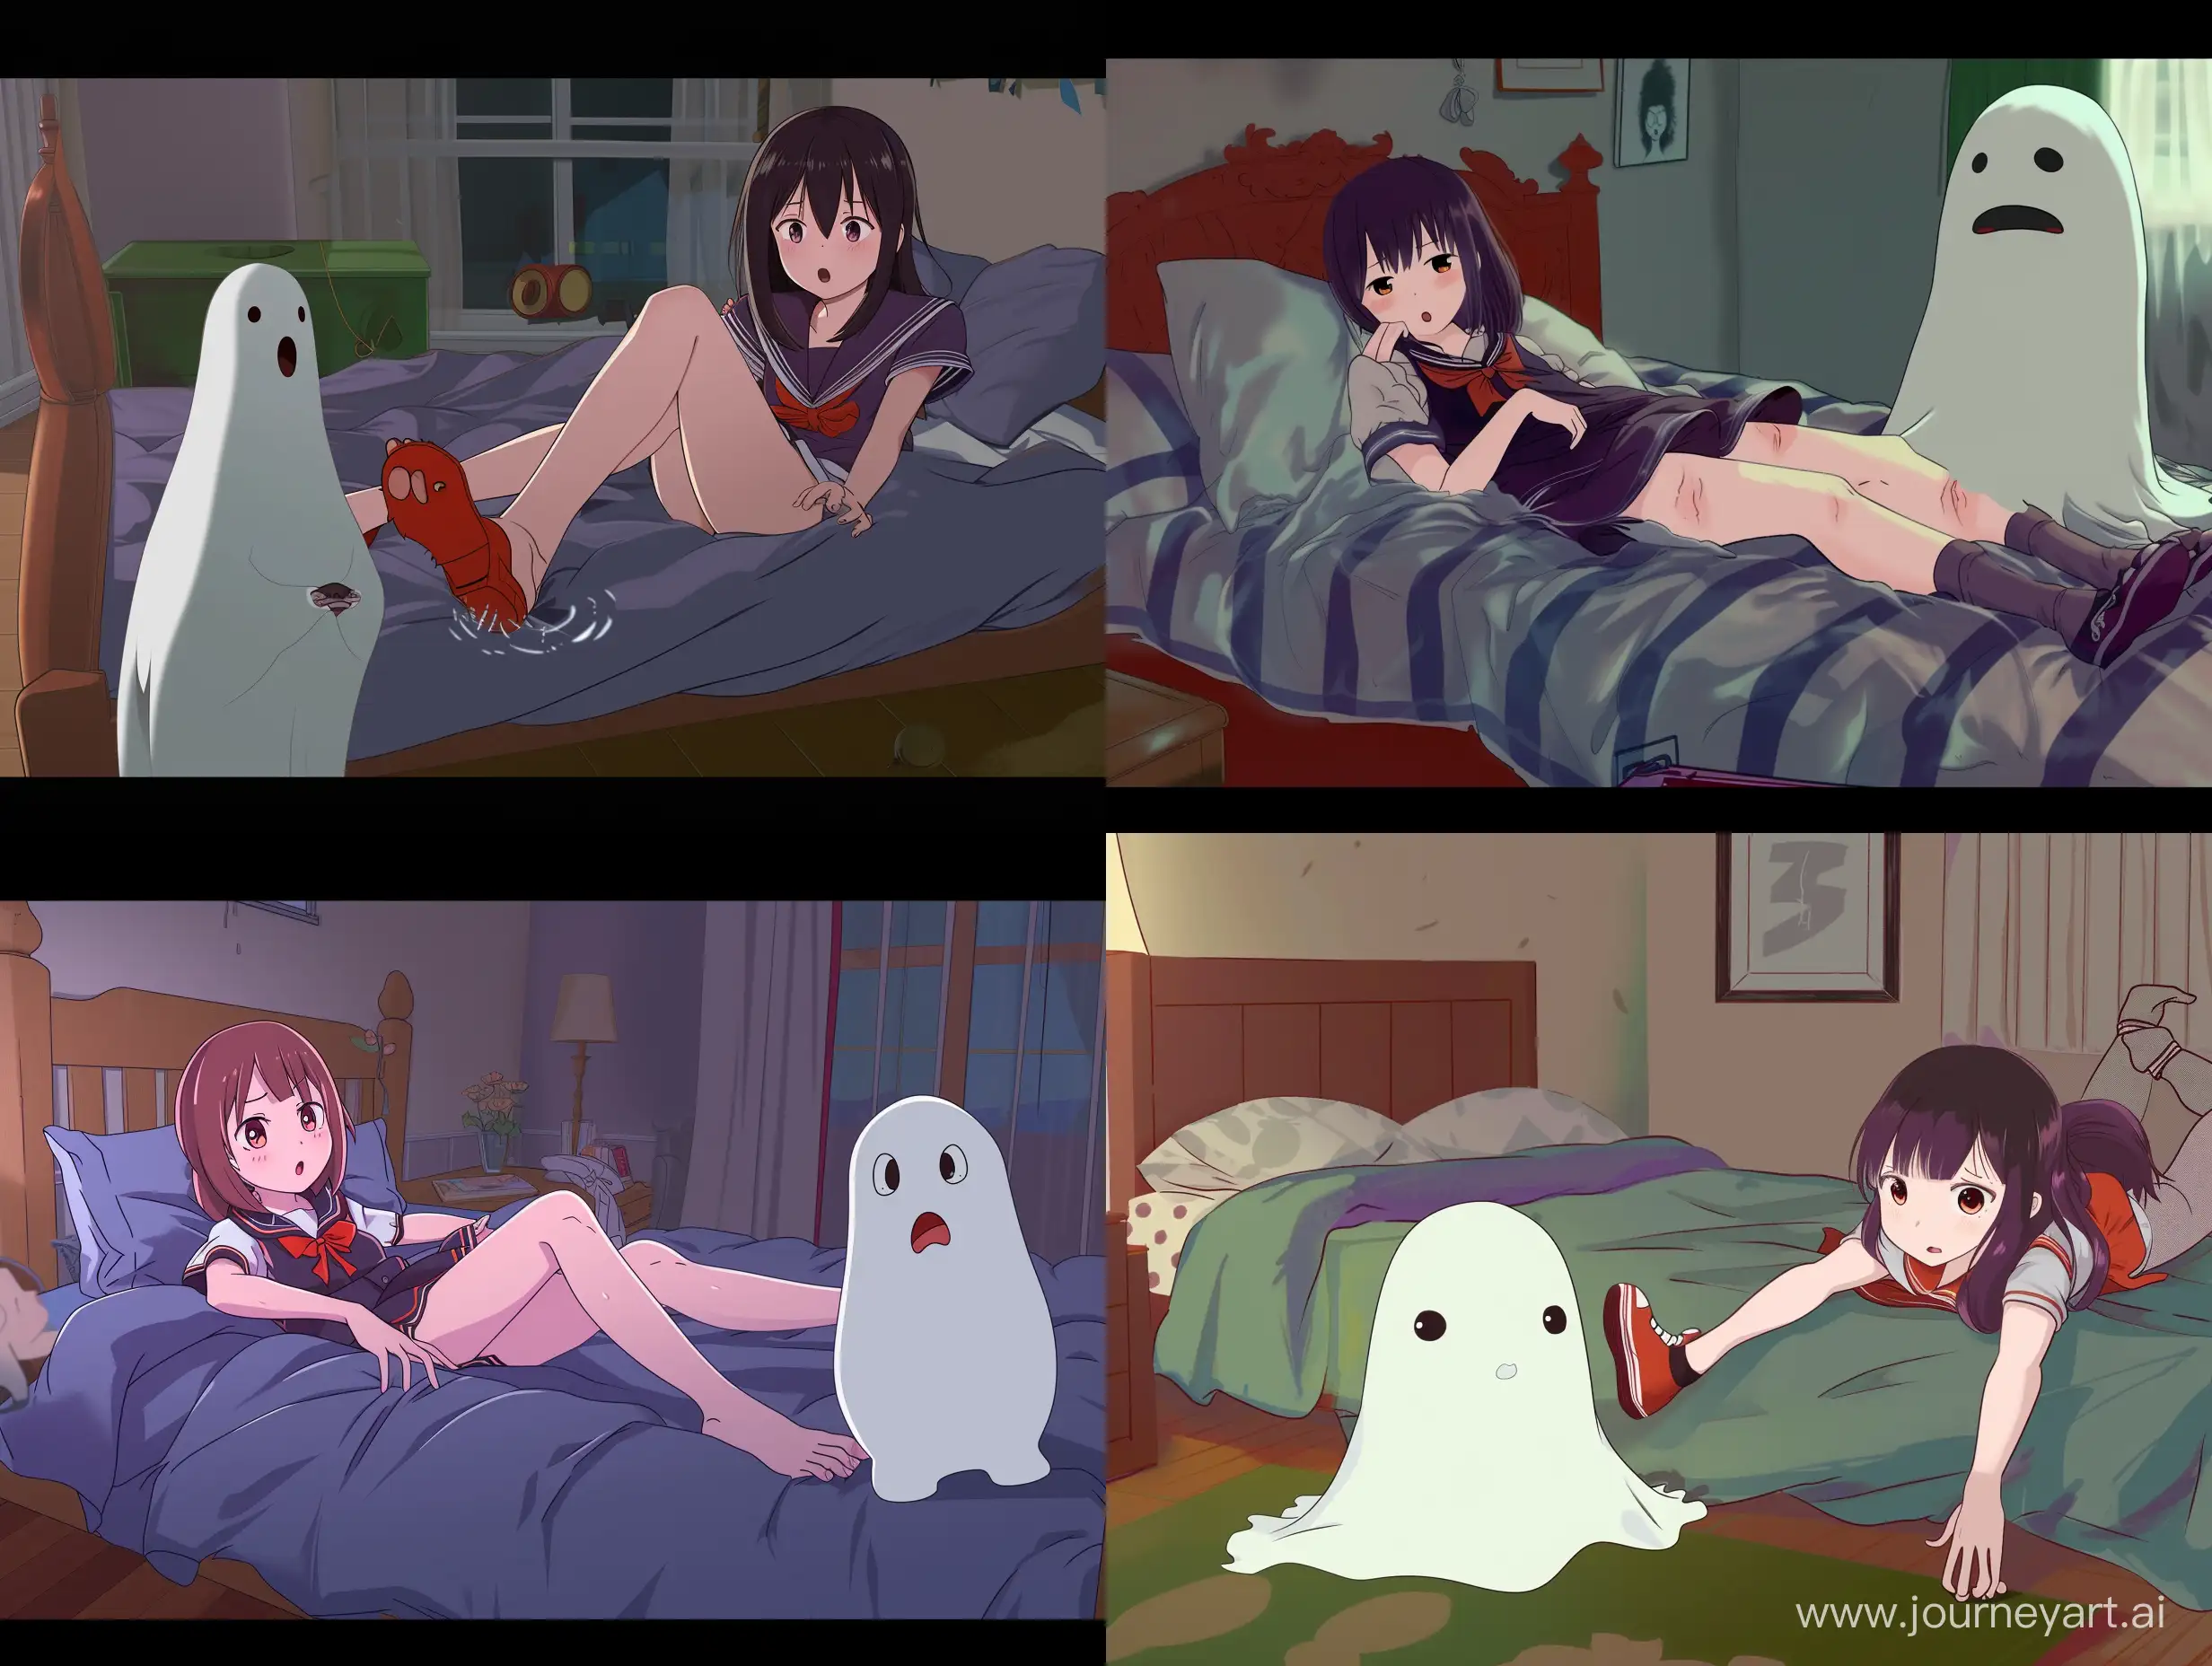 Scared-Anime-Girl-Finds-Ghost-Under-Bed